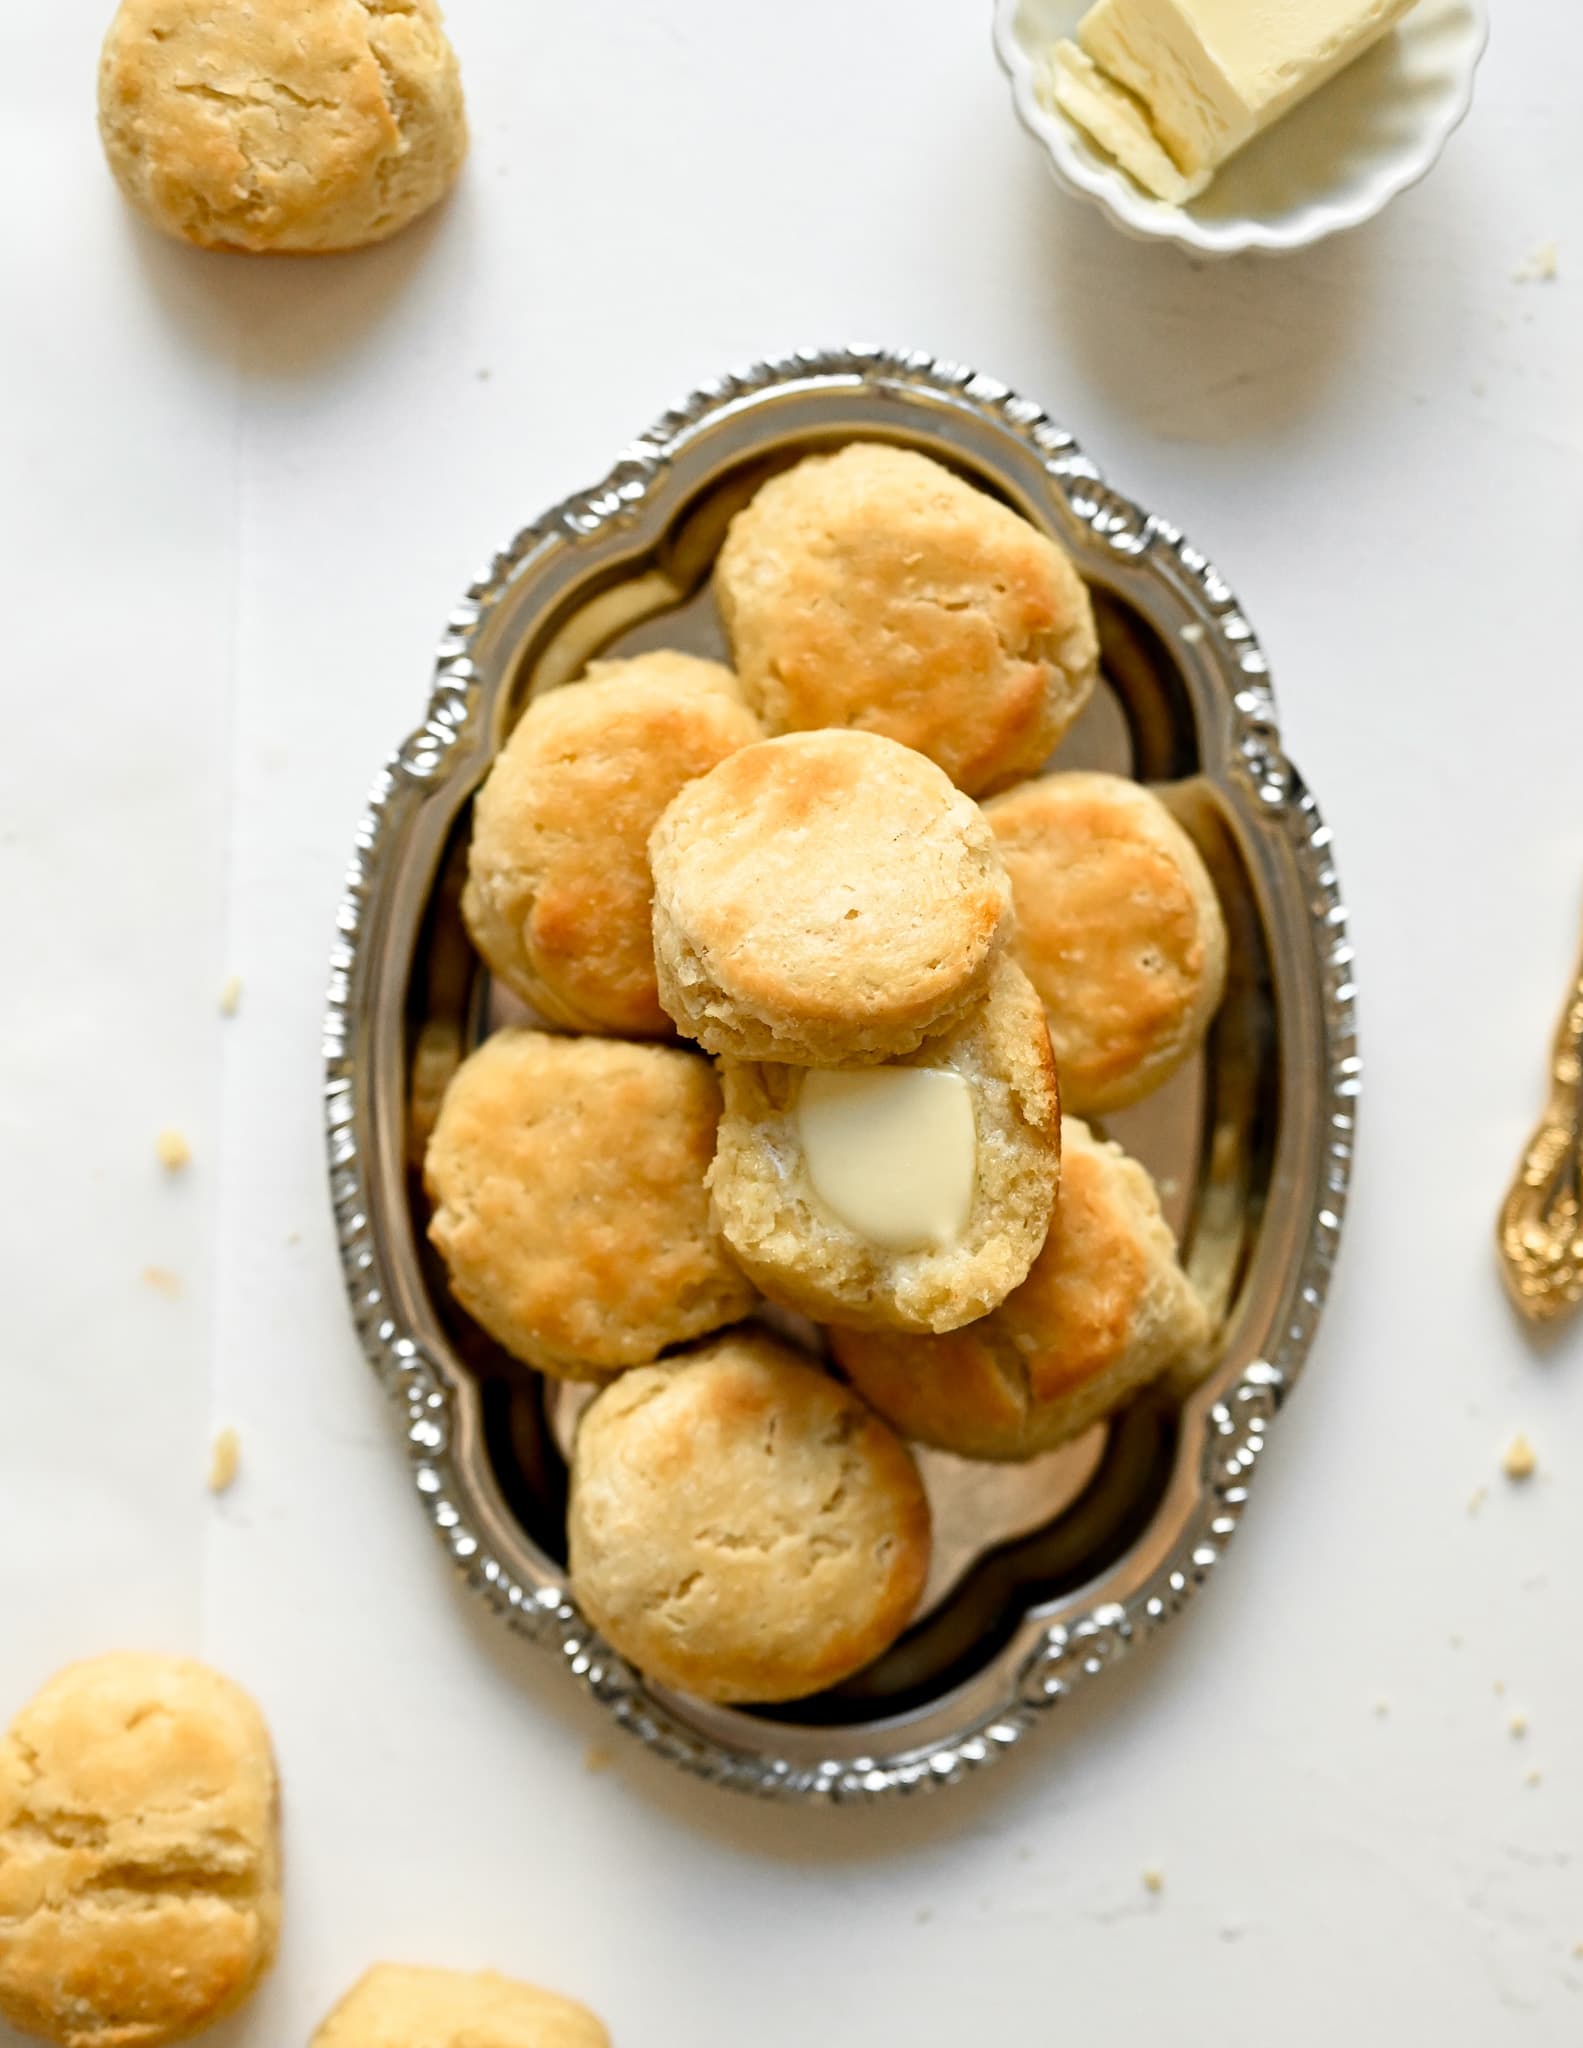 A pile of biscuits stacked on top of a silver ornate platter. The biscuit on the top is cut in half with melted butter. Surrounding the serving platter are several biscuits and butter in a serving dish.